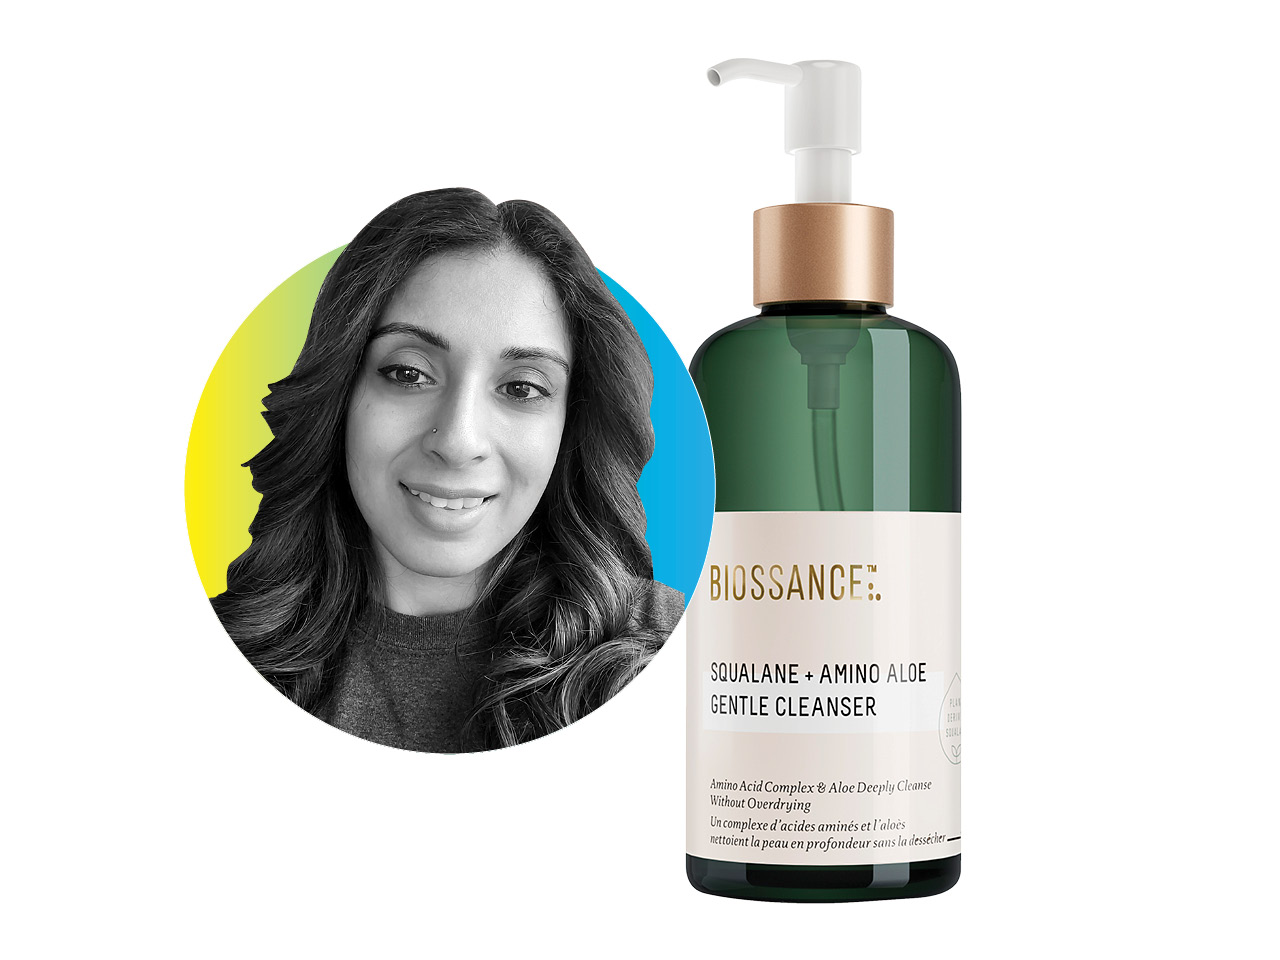 A Chatelaine reader reviews Biossance Squalane and Aloe Cleanser.